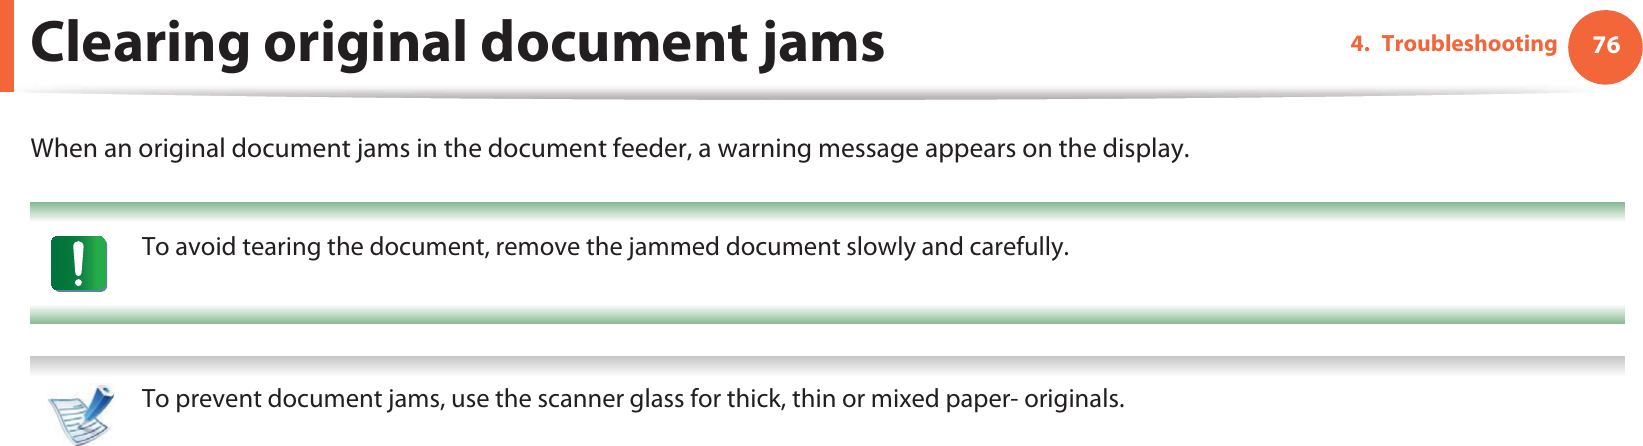 764. TroubleshootingClearing original document jamsWhen an original document jams in the document feeder, a warning message appears on the display. To avoid tearing the document, remove the jammed document slowly and carefully.  To prevent document jams, use the scanner glass for thick, thin or mixed paper- originals. 